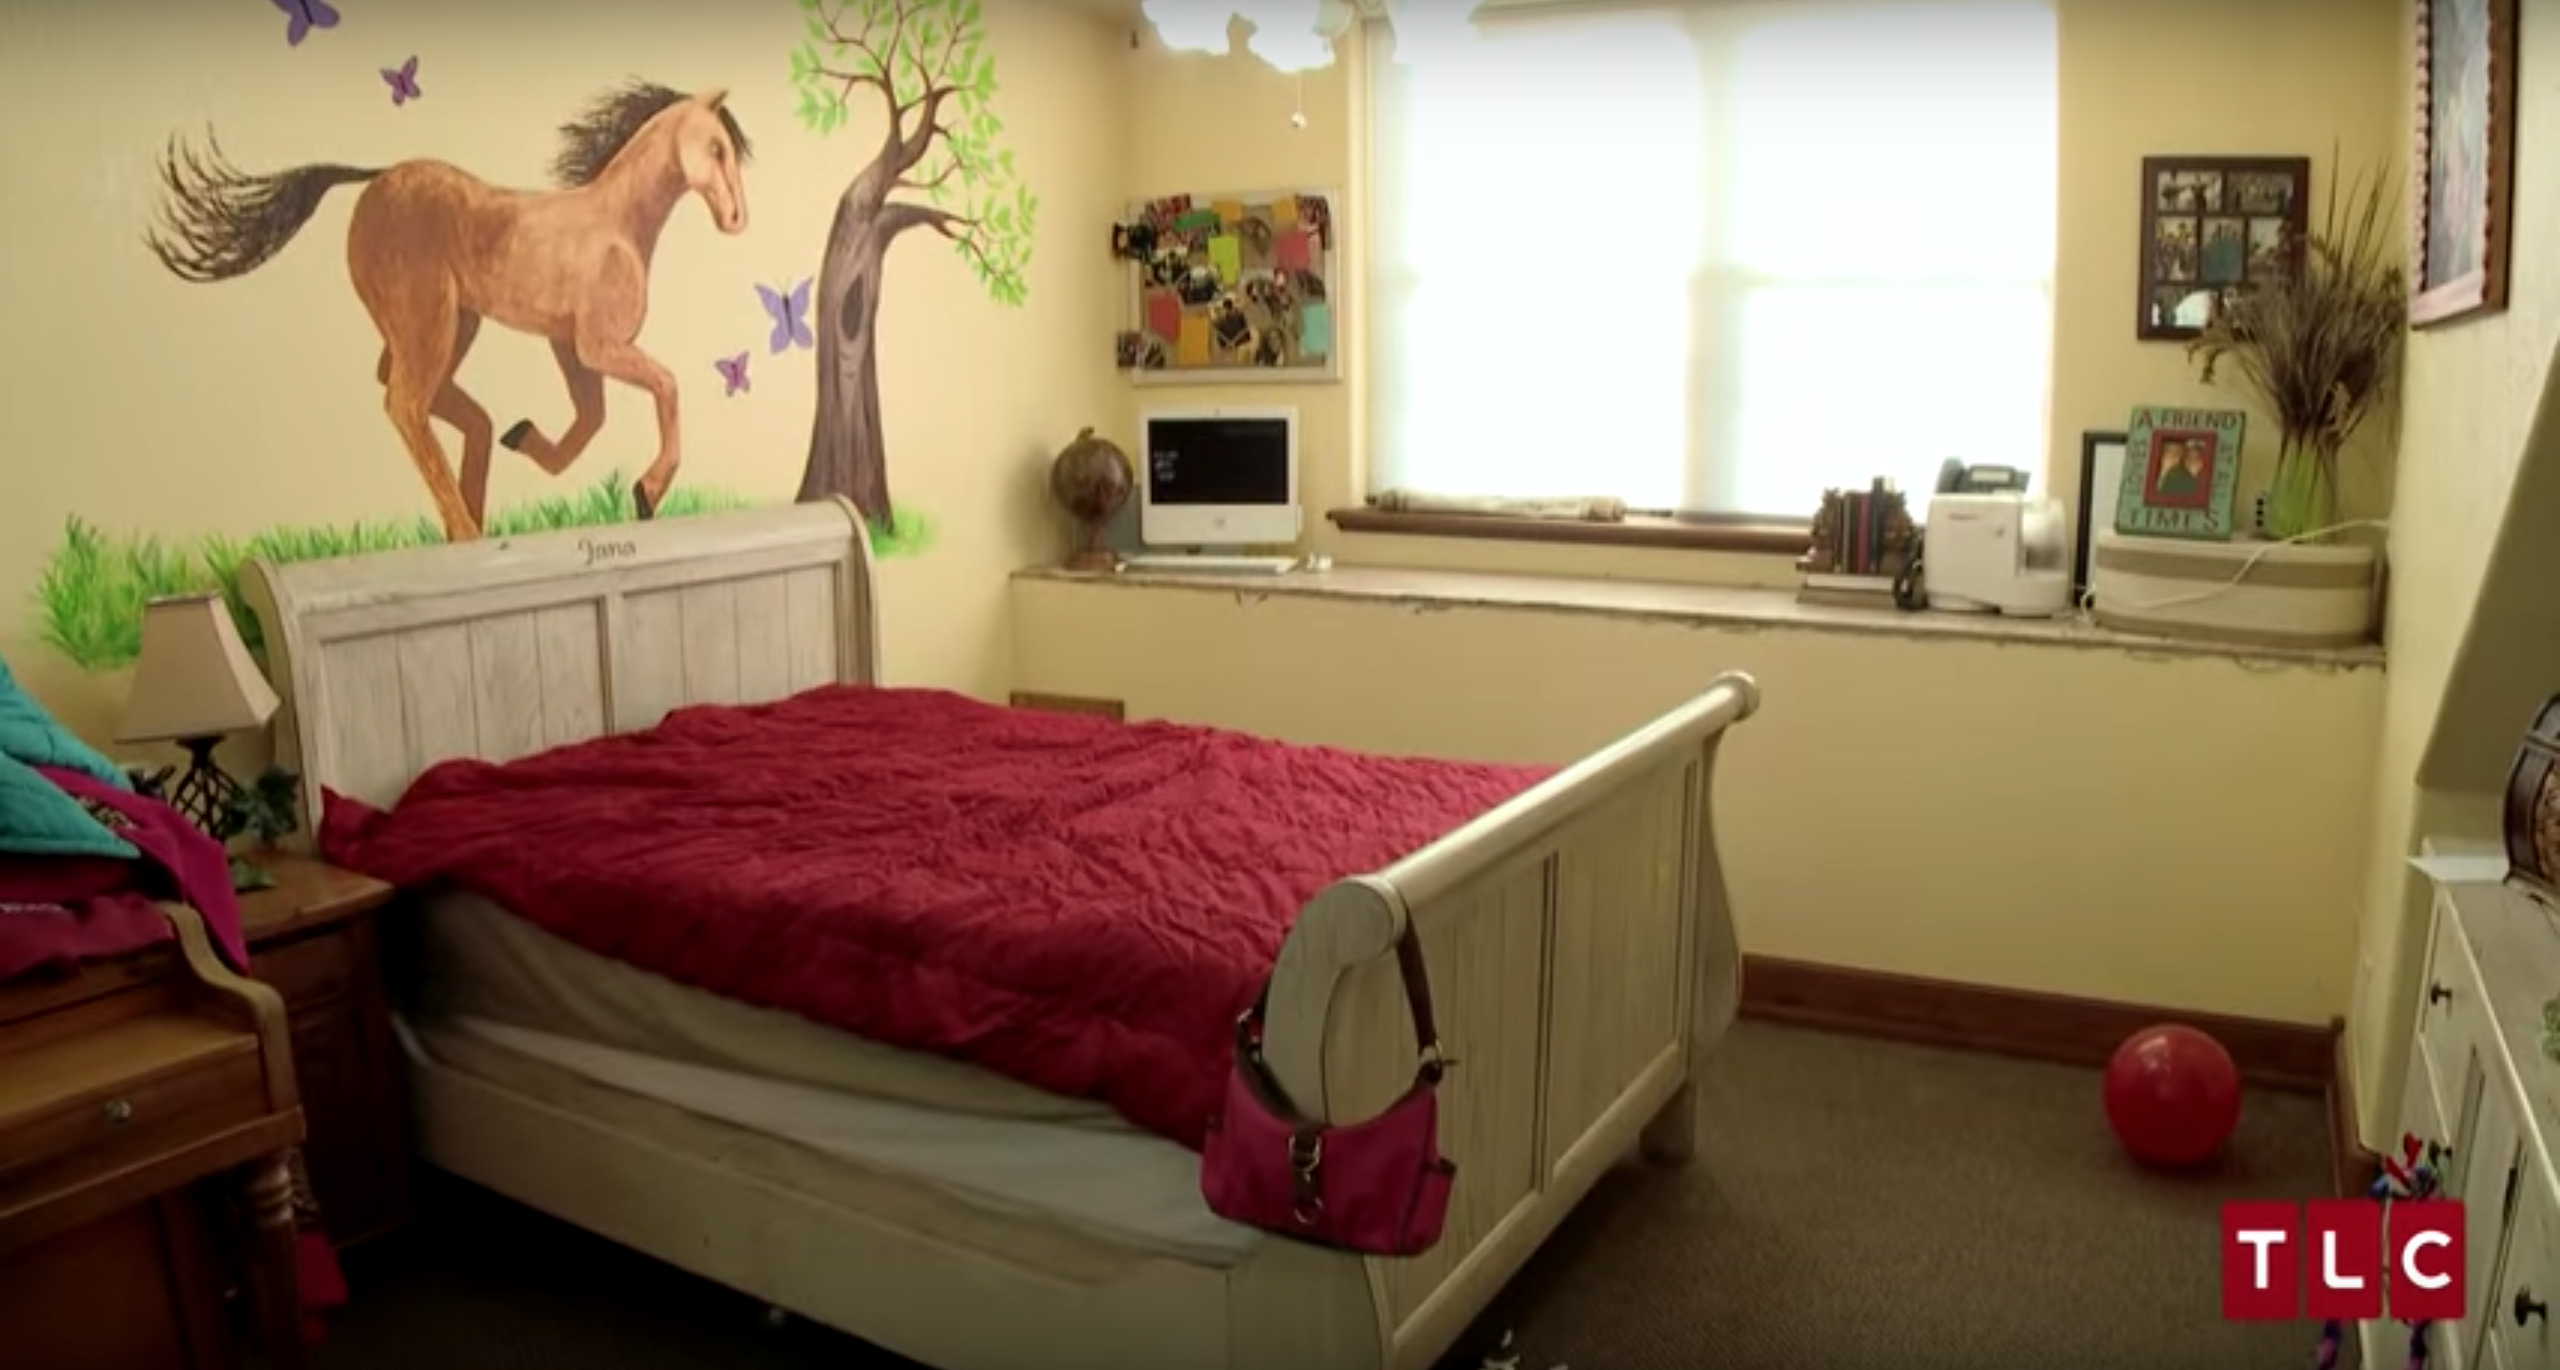 Duggar Home Makeovers Before And After Pics Of Their Renovations In Touch Weekly 